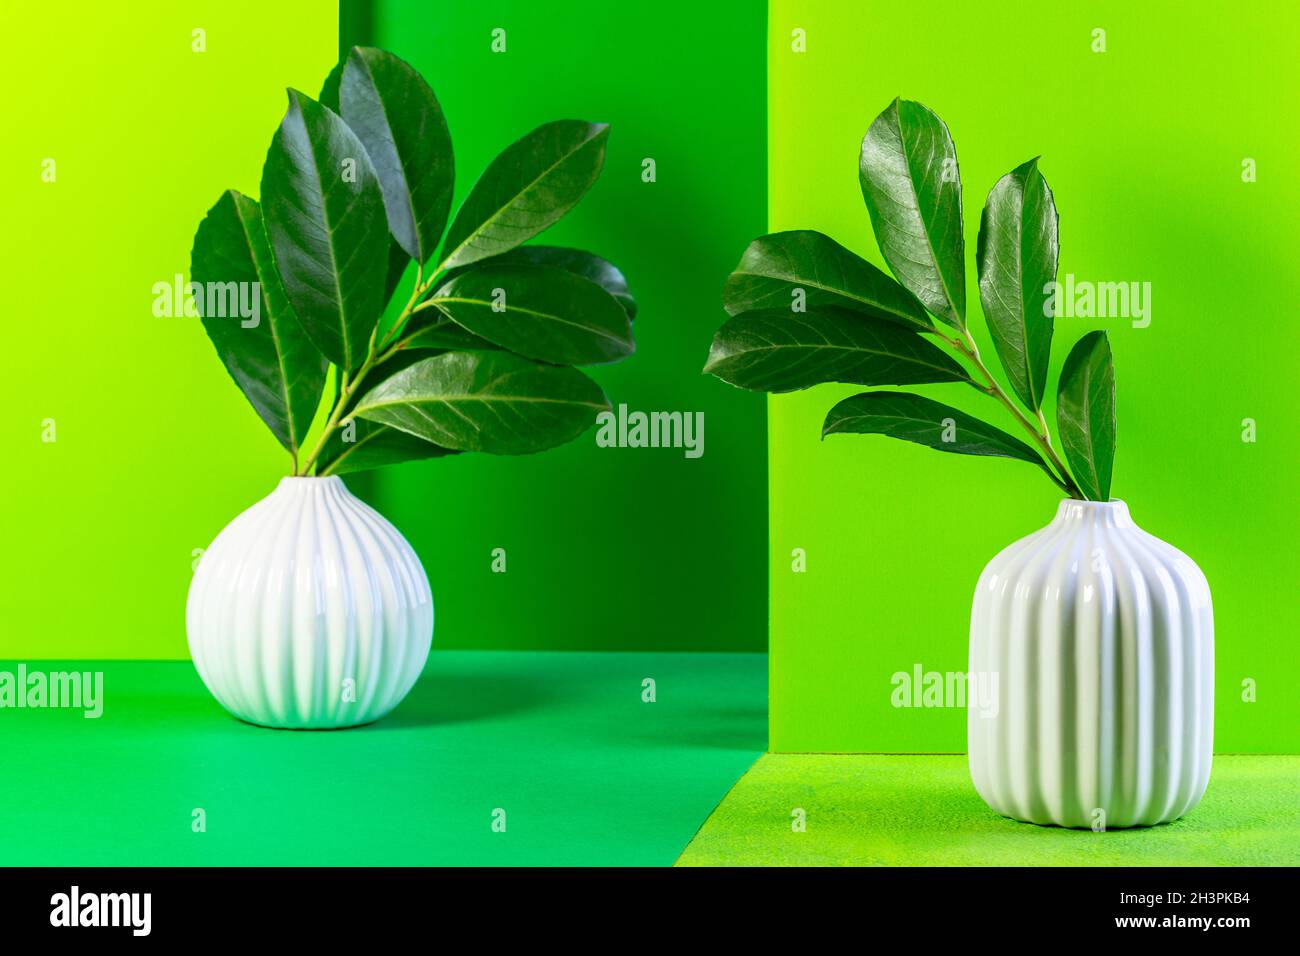 Ceramic vases with evergreen branches. Stock Photo